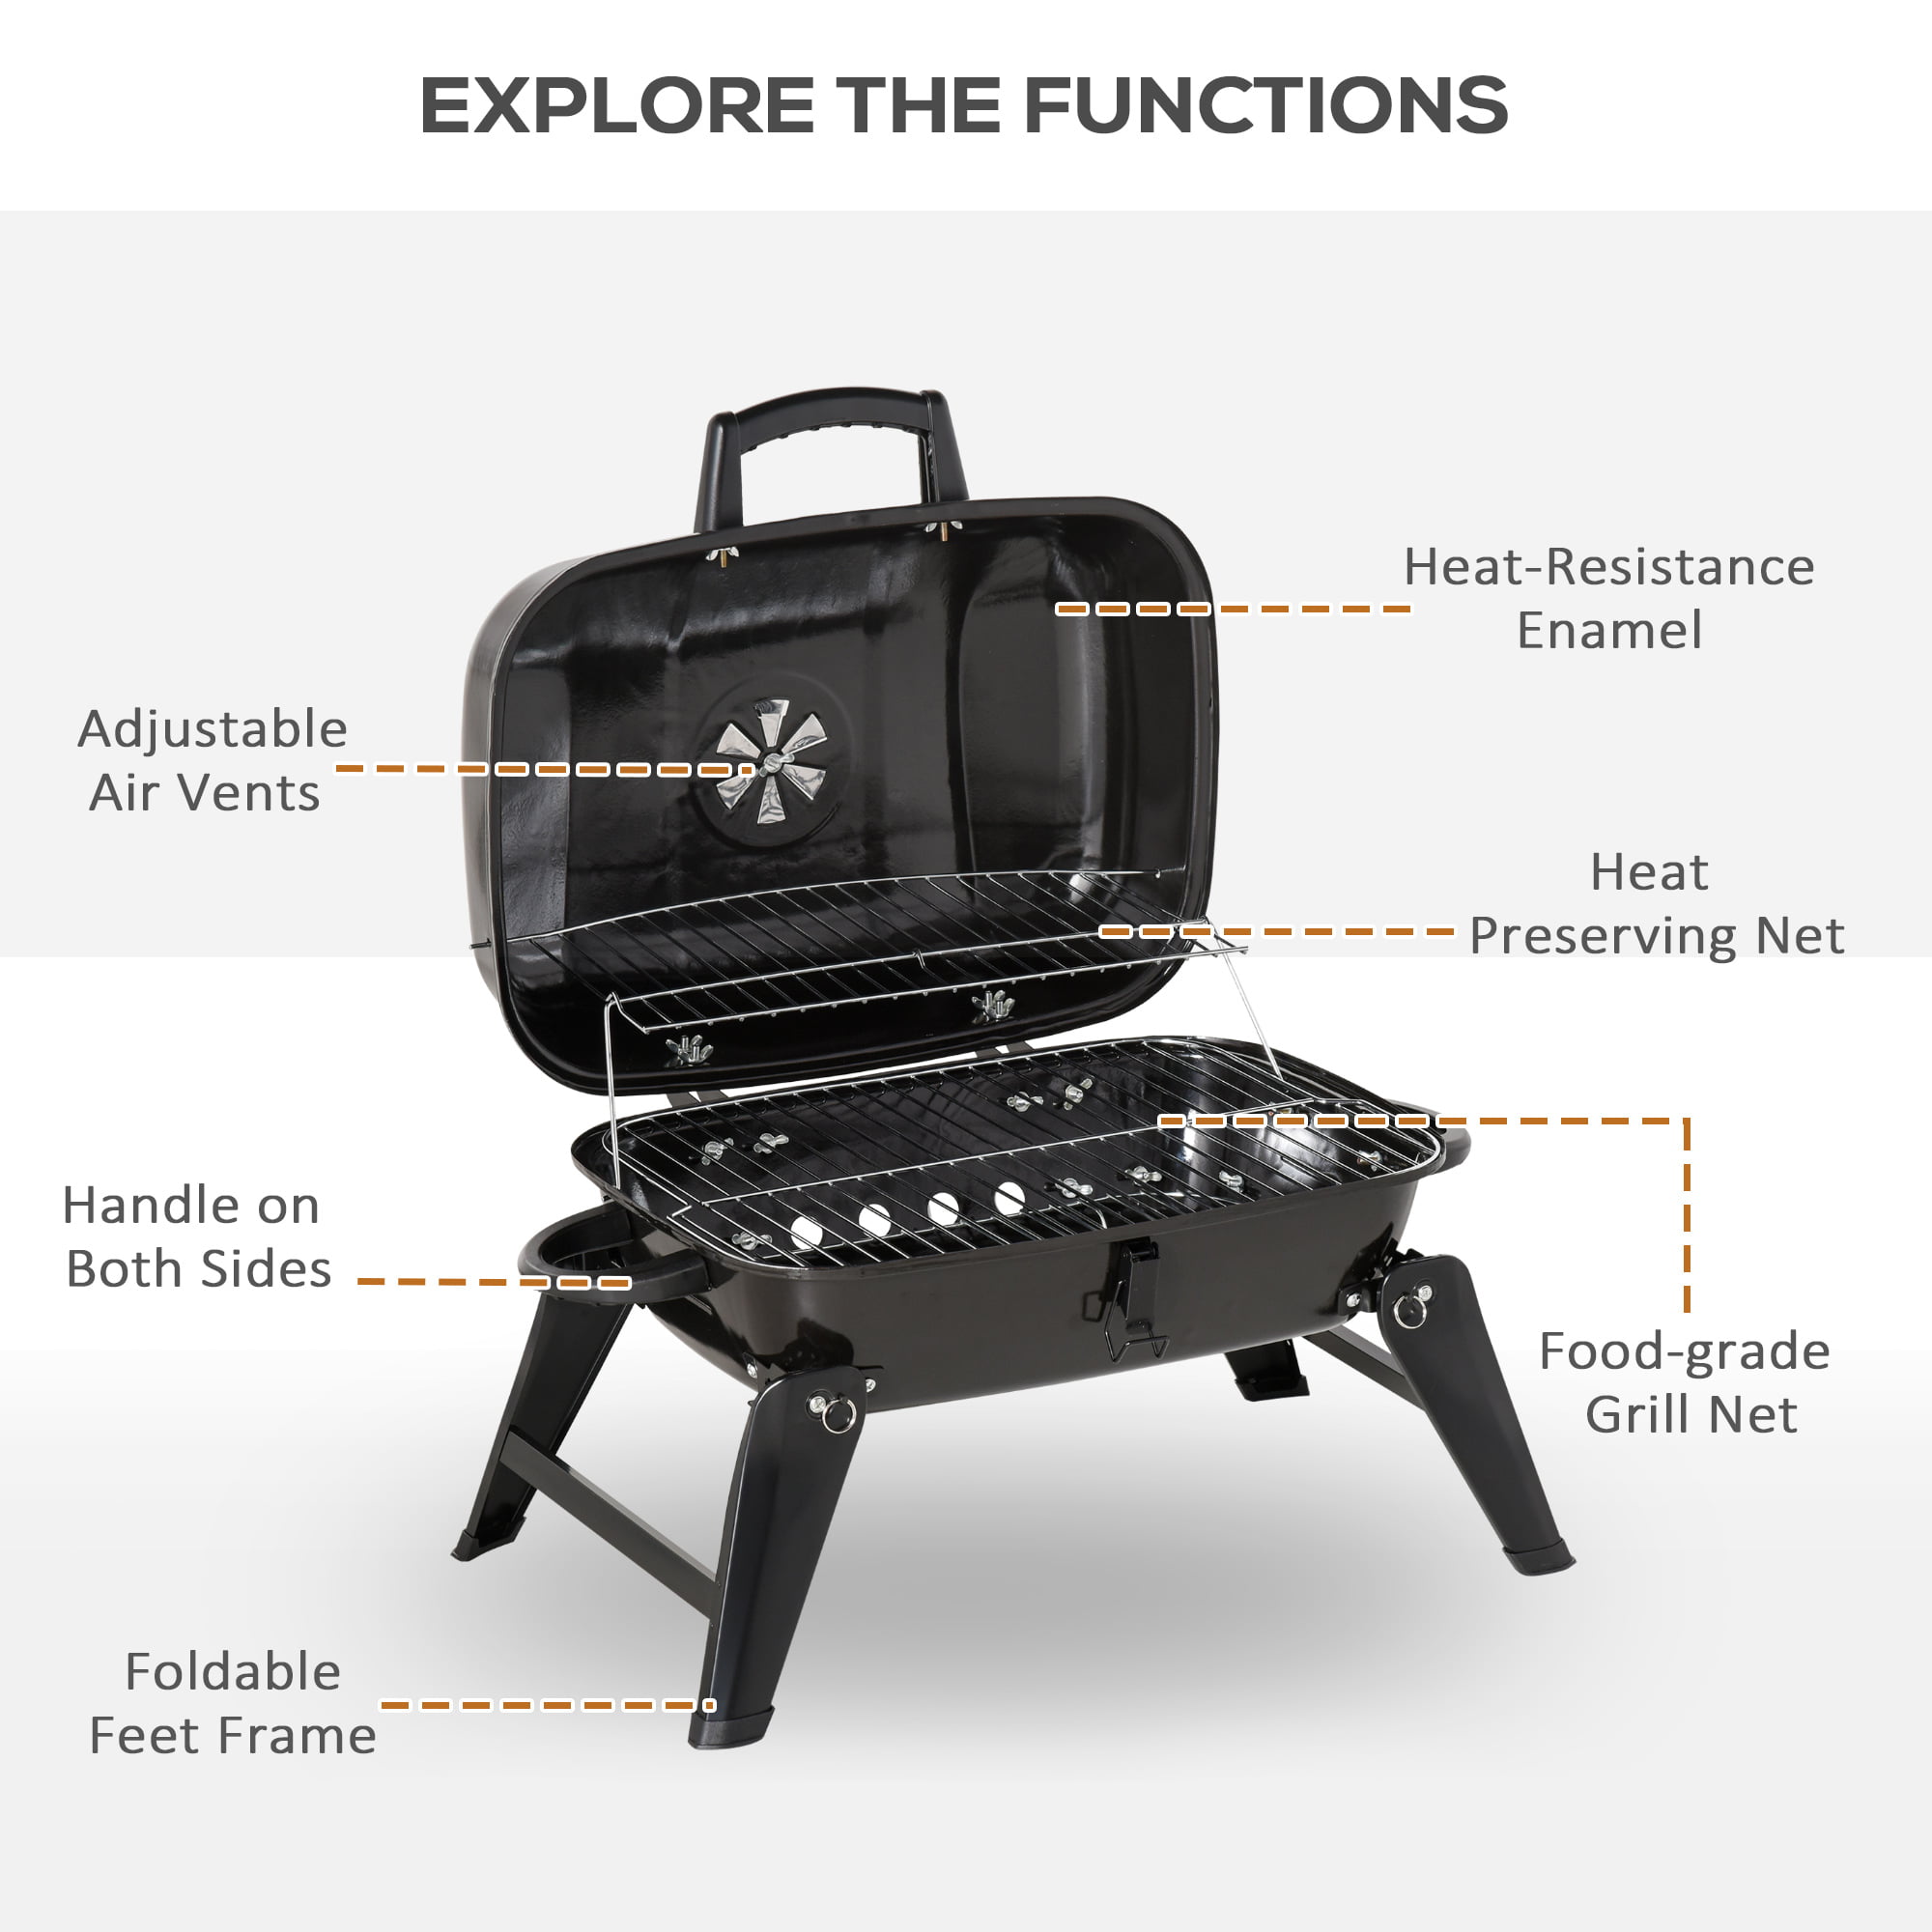 ACWARM HOME Portable Charcoal Grill, Small BBQ Smoker Grill, TableTop  Barbecue Charcoal Grill for Outdoor Camping Garden Backyard Cooking Picnic